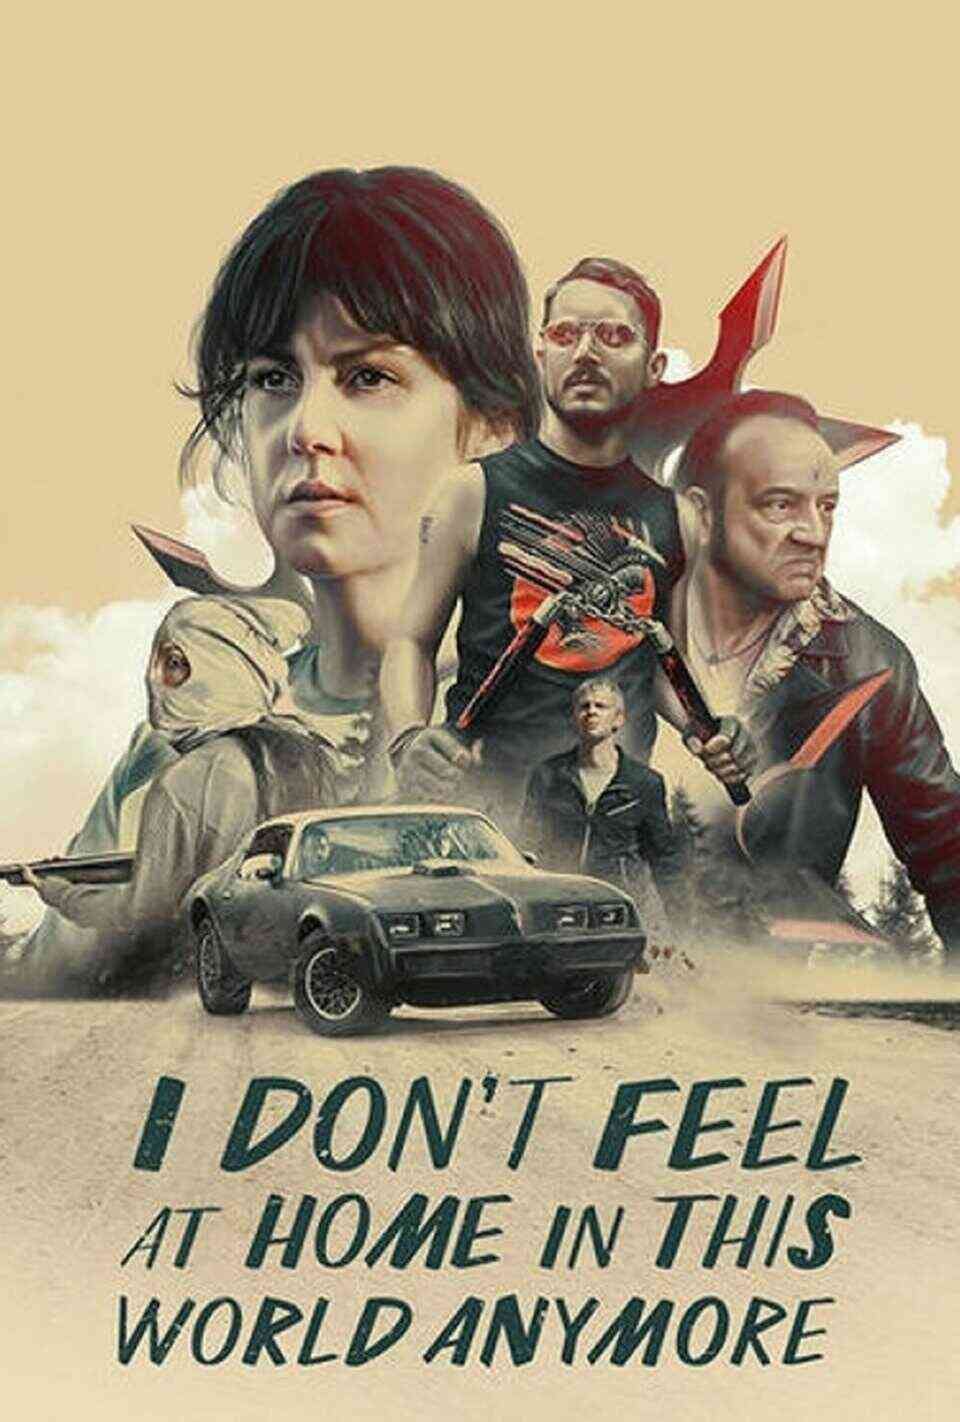 Read I Don't Feel at Home in This World Anymore. screenplay.